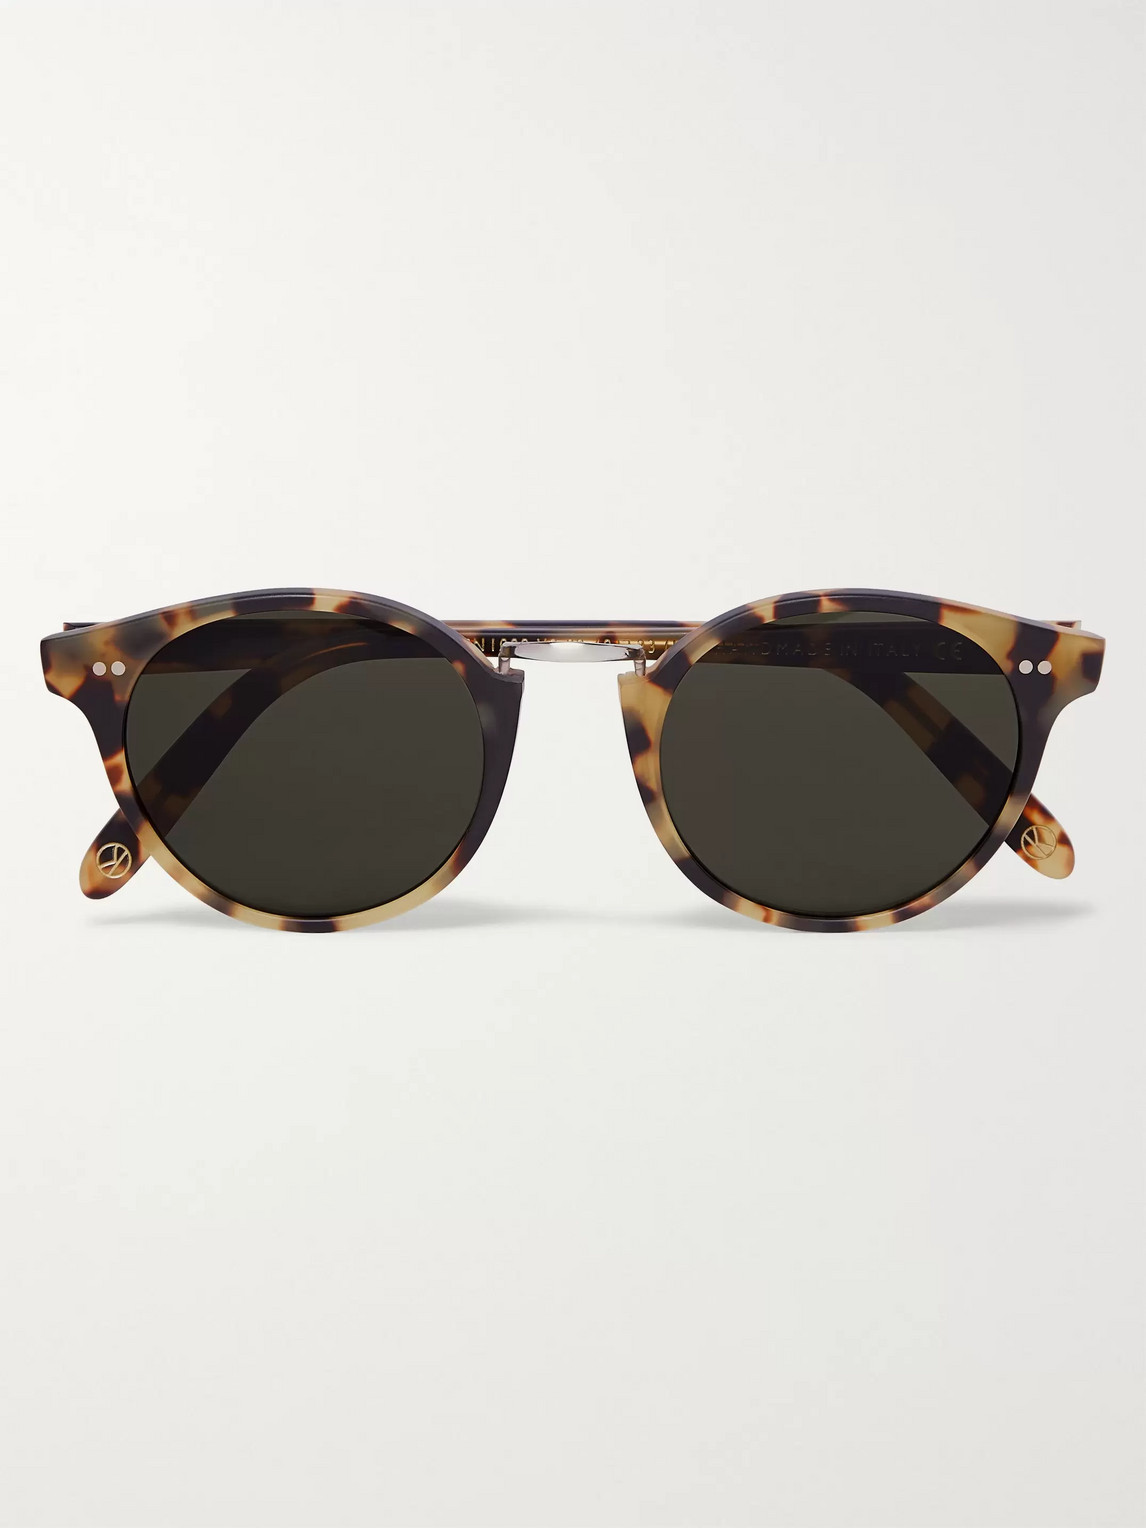 Kingsman Cutler And Gross Round-frame Tortoiseshell Acetate And Silver-tone Metal Sunglasses